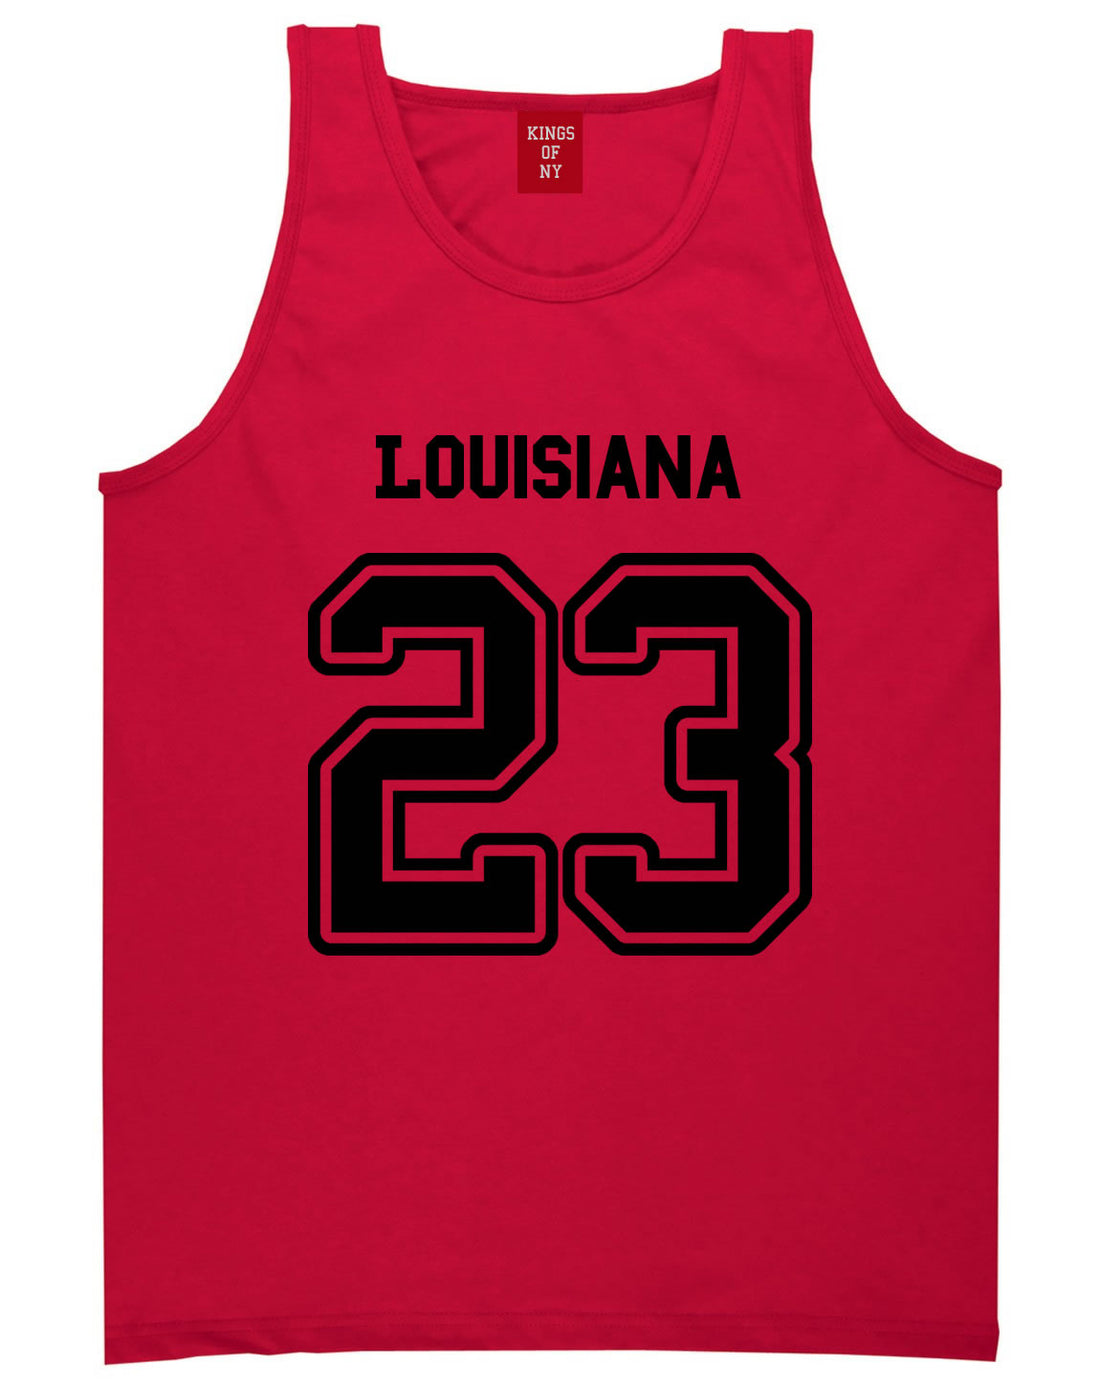 Sport Style Louisiana 23 Team State Jersey Mens Tank Top By Kings Of NY